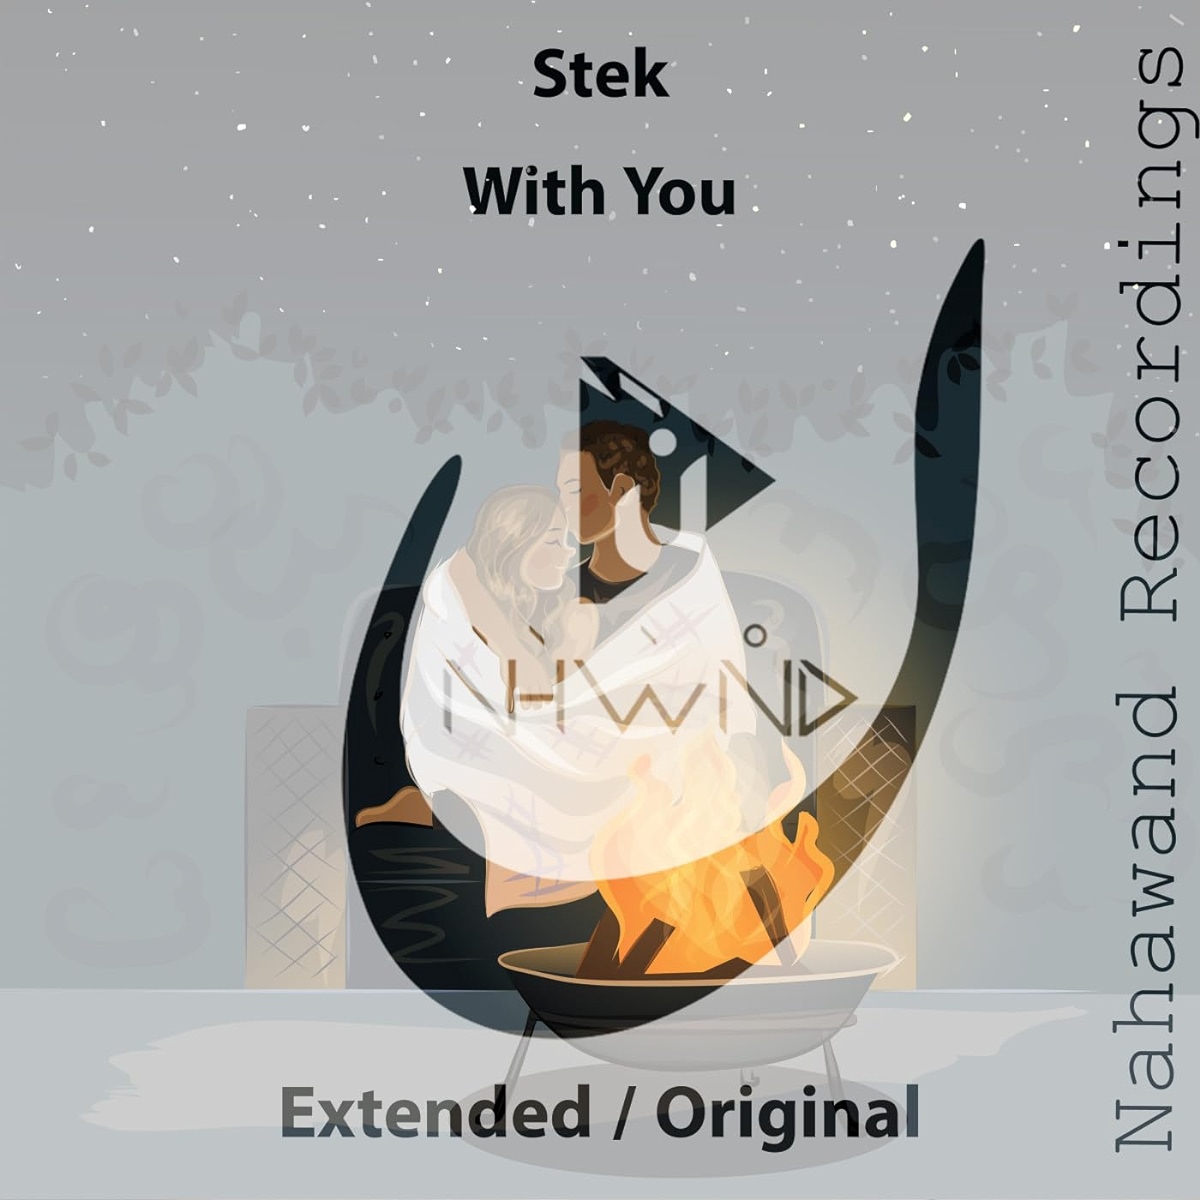 Stek - With You (Extended Mix)